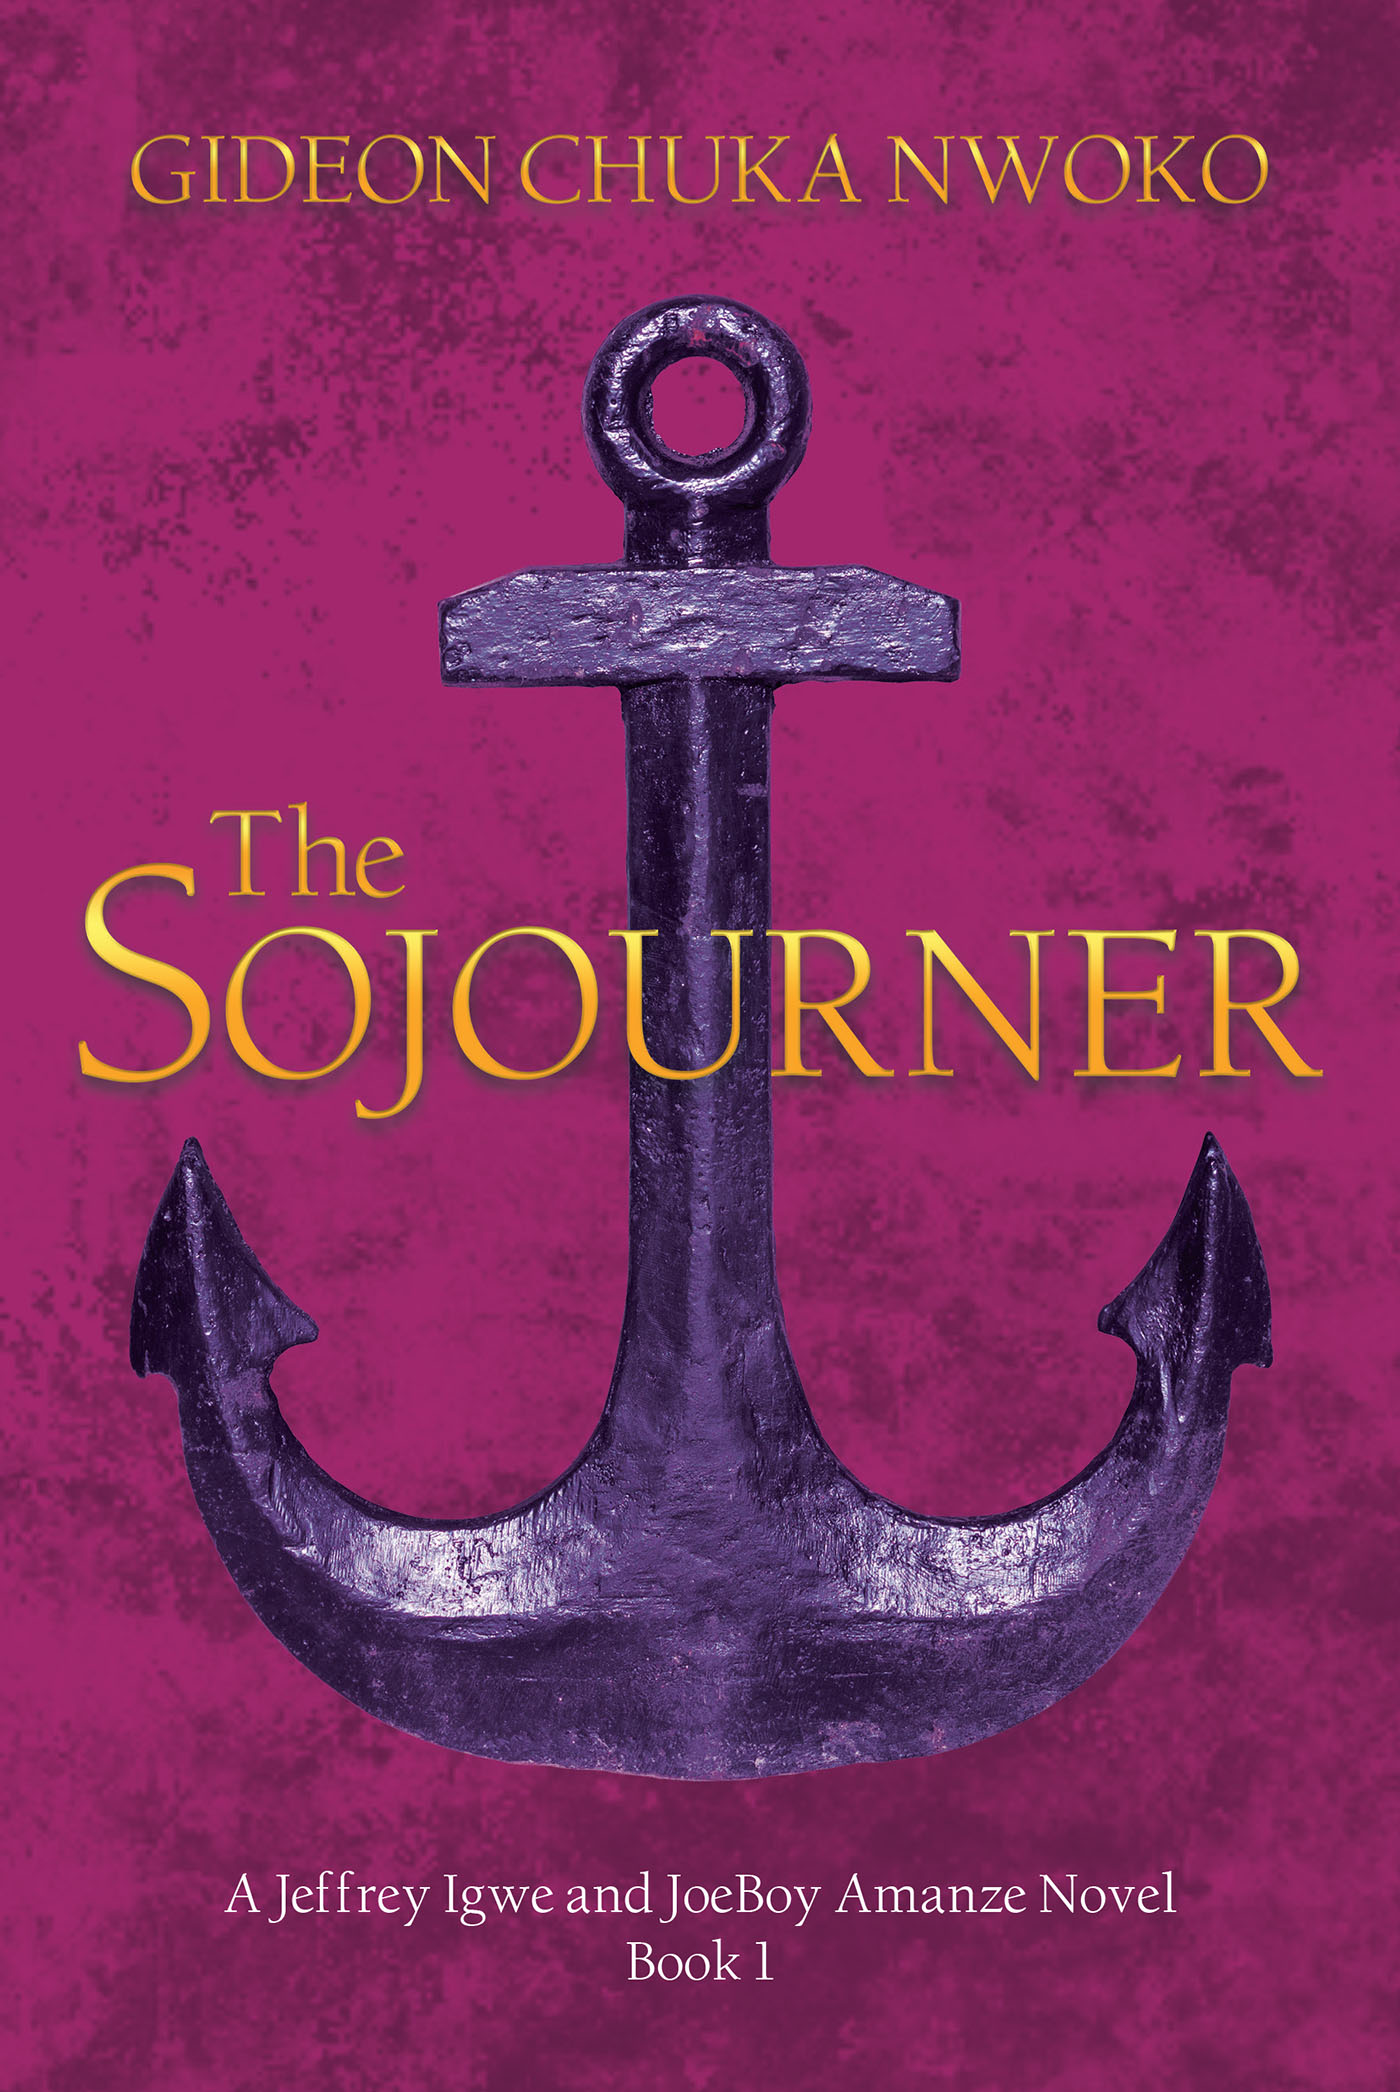 Author Gideon Chuka Nwoko’s New Book, "The Sojourner," is a Compelling Historical Fiction Following Two Friends and Their Lives in Post-Civil War Nigeria